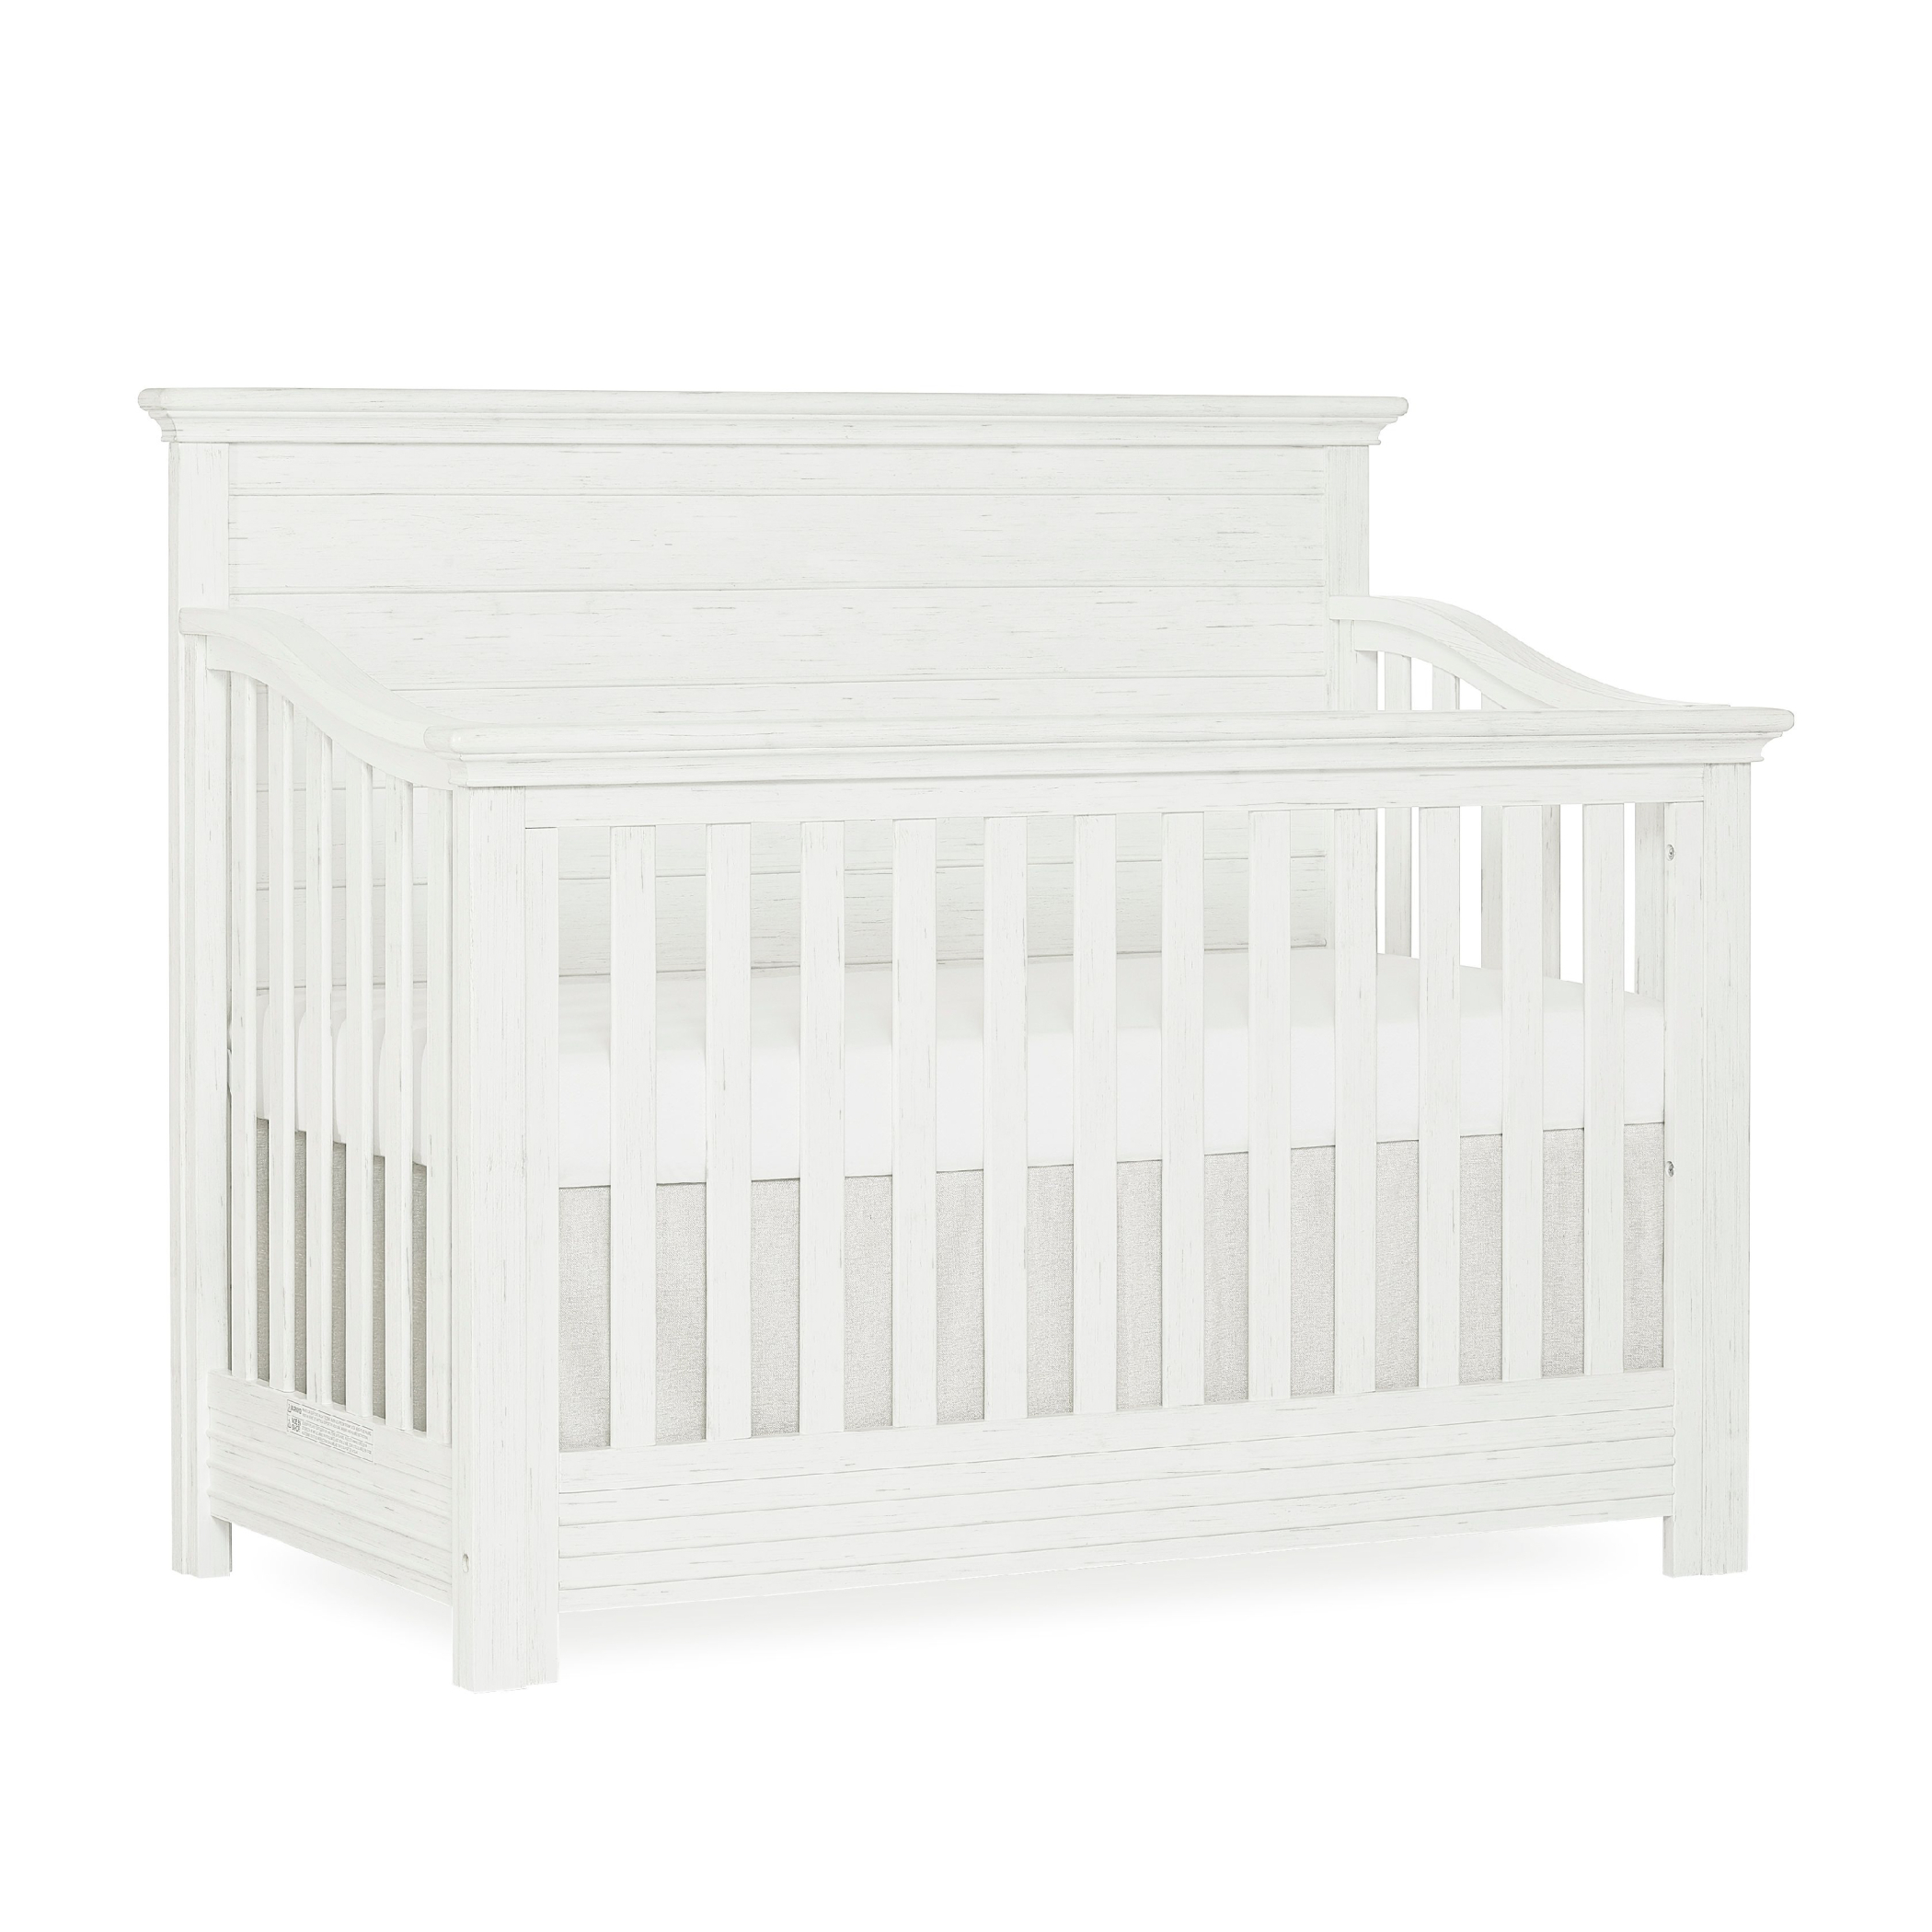 Evolur Waverly 5-in-1 Full Panel Convertible Crib, Weathered White - image 1 of 21